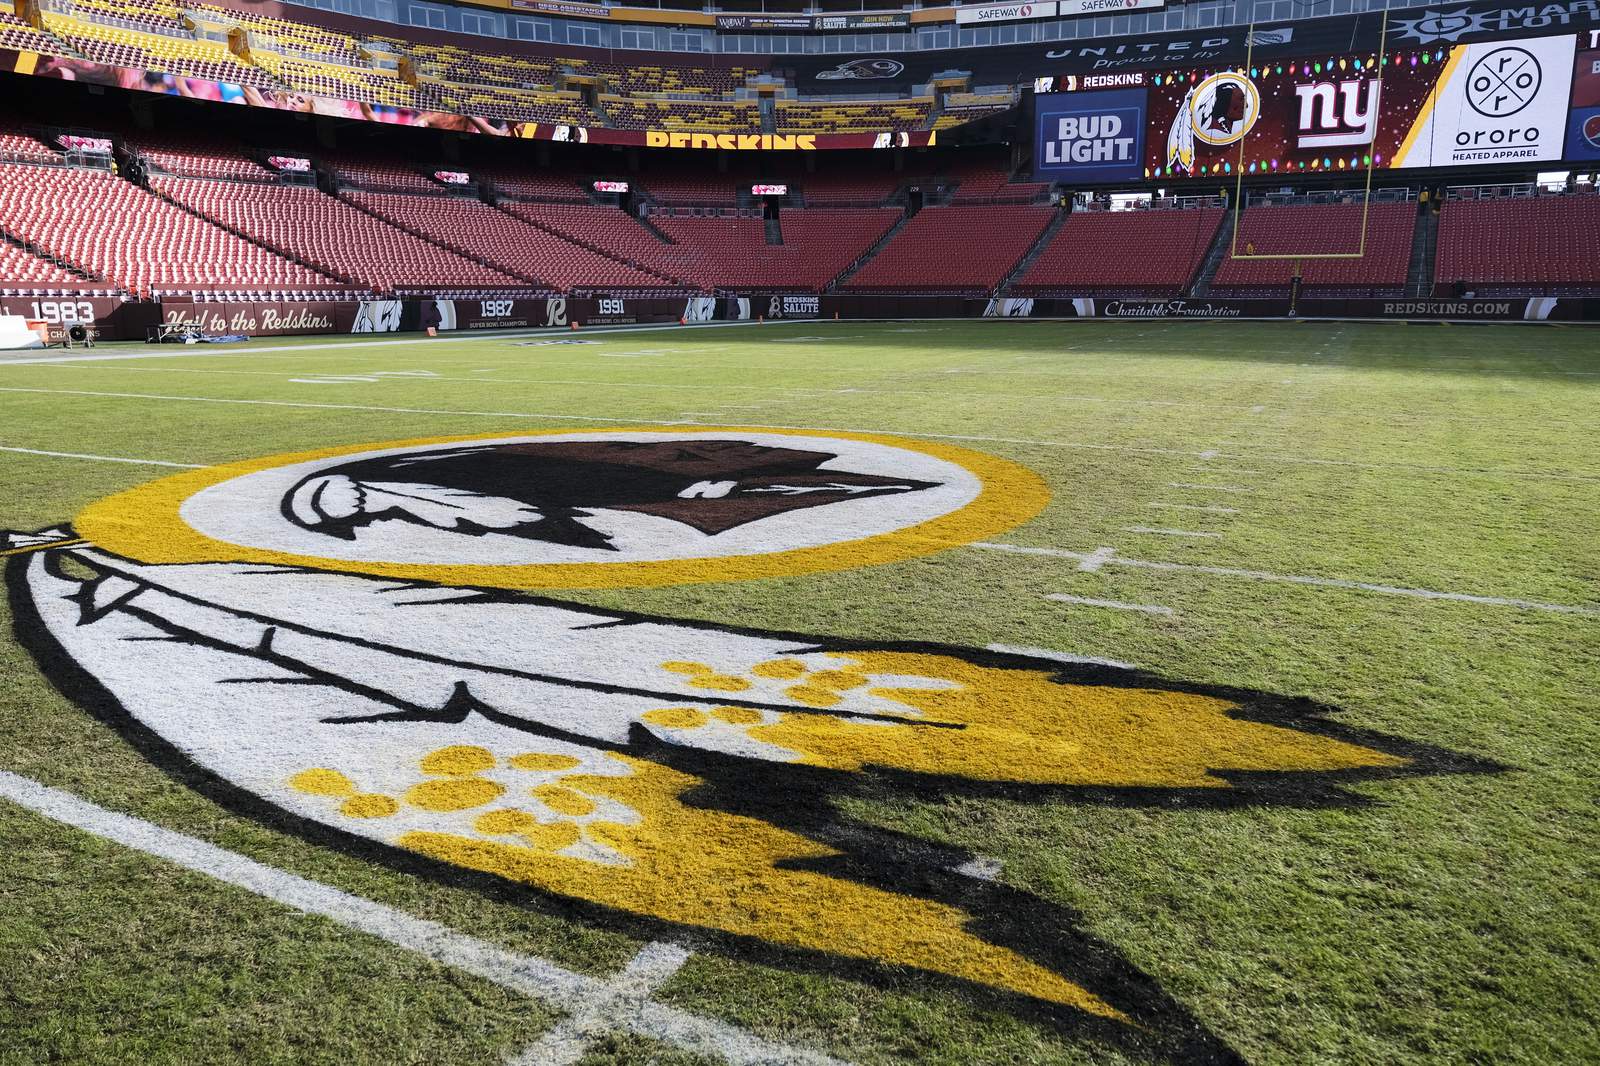 At least 15 women are accusing Washington Redskins staffers of sexual harassment, report says